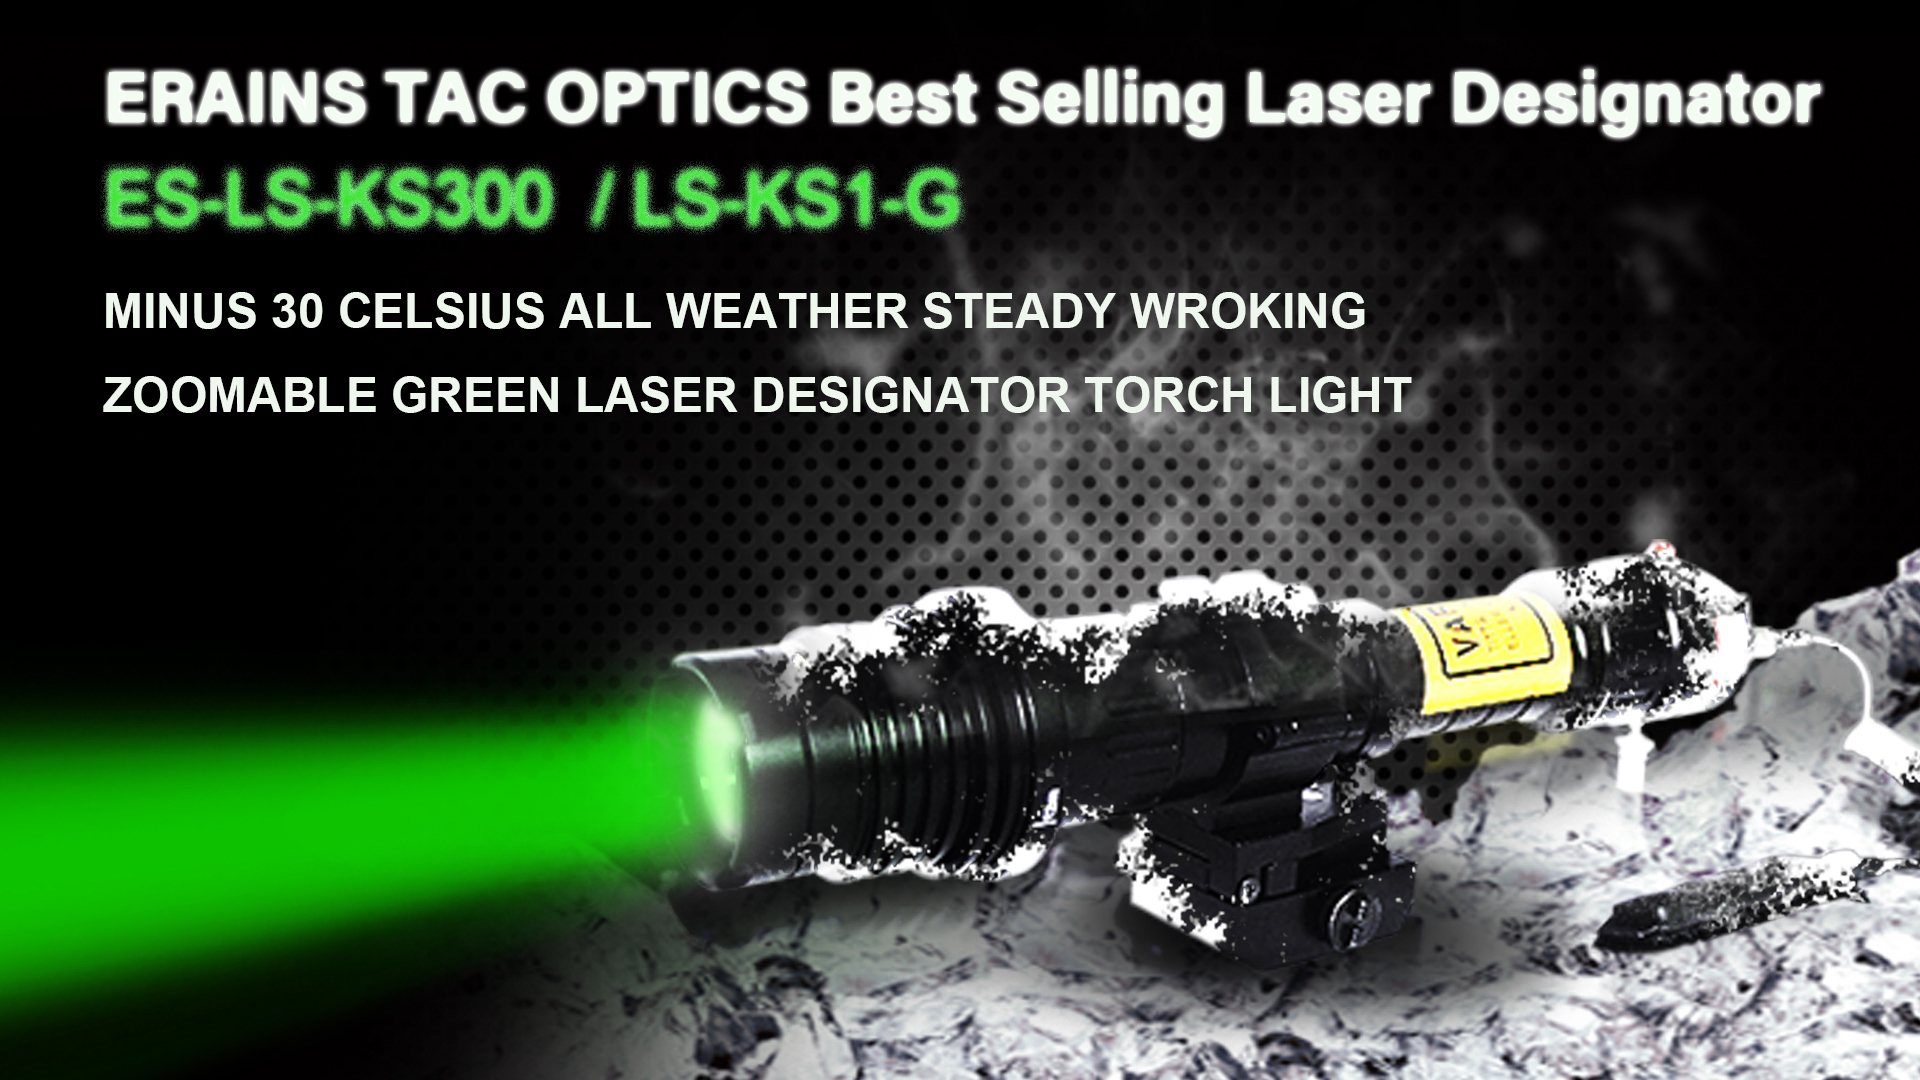 The perfect long distance subzero 100mw green laser designator with rifle mount accessories and rechargeable batteries.